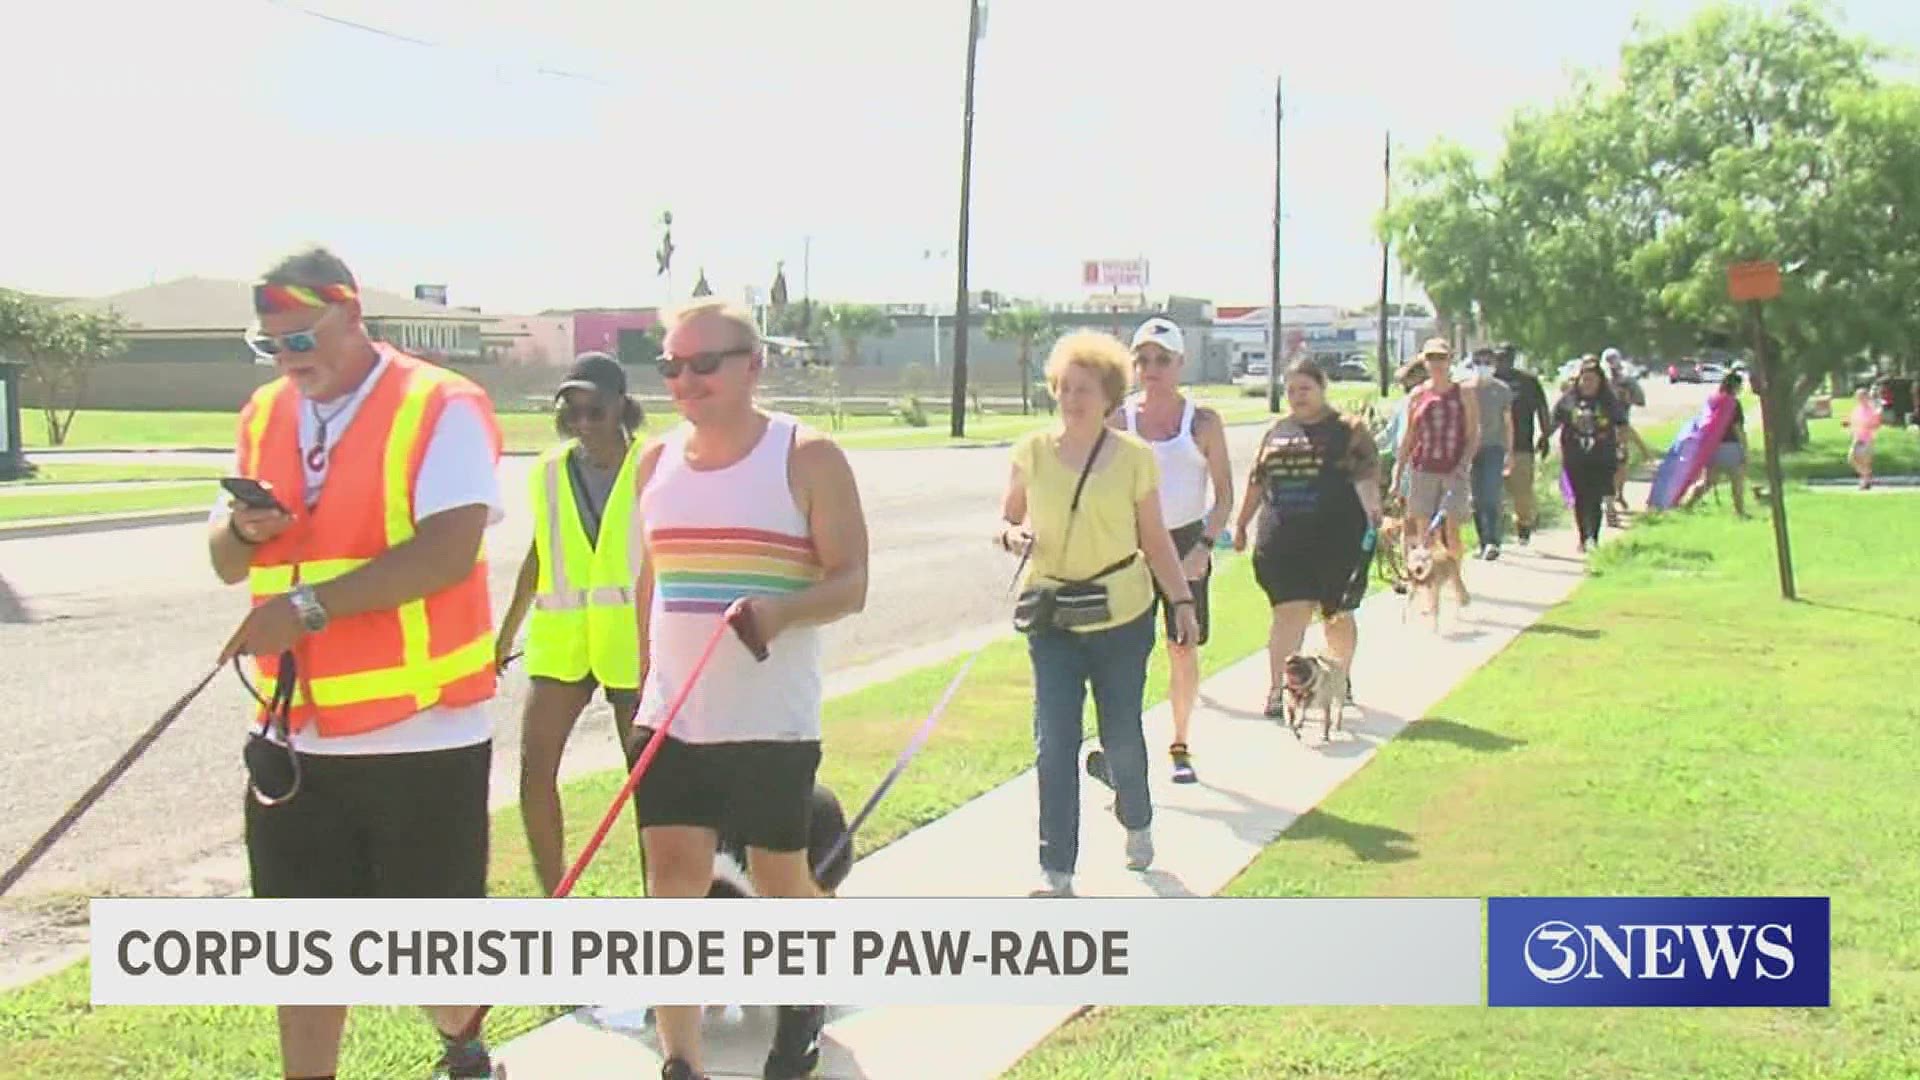 “It’s the first time we had a pet parade a pet PAW-rade, for pride,” said Tom Tagliabue, President of Pride Corpus Christi.